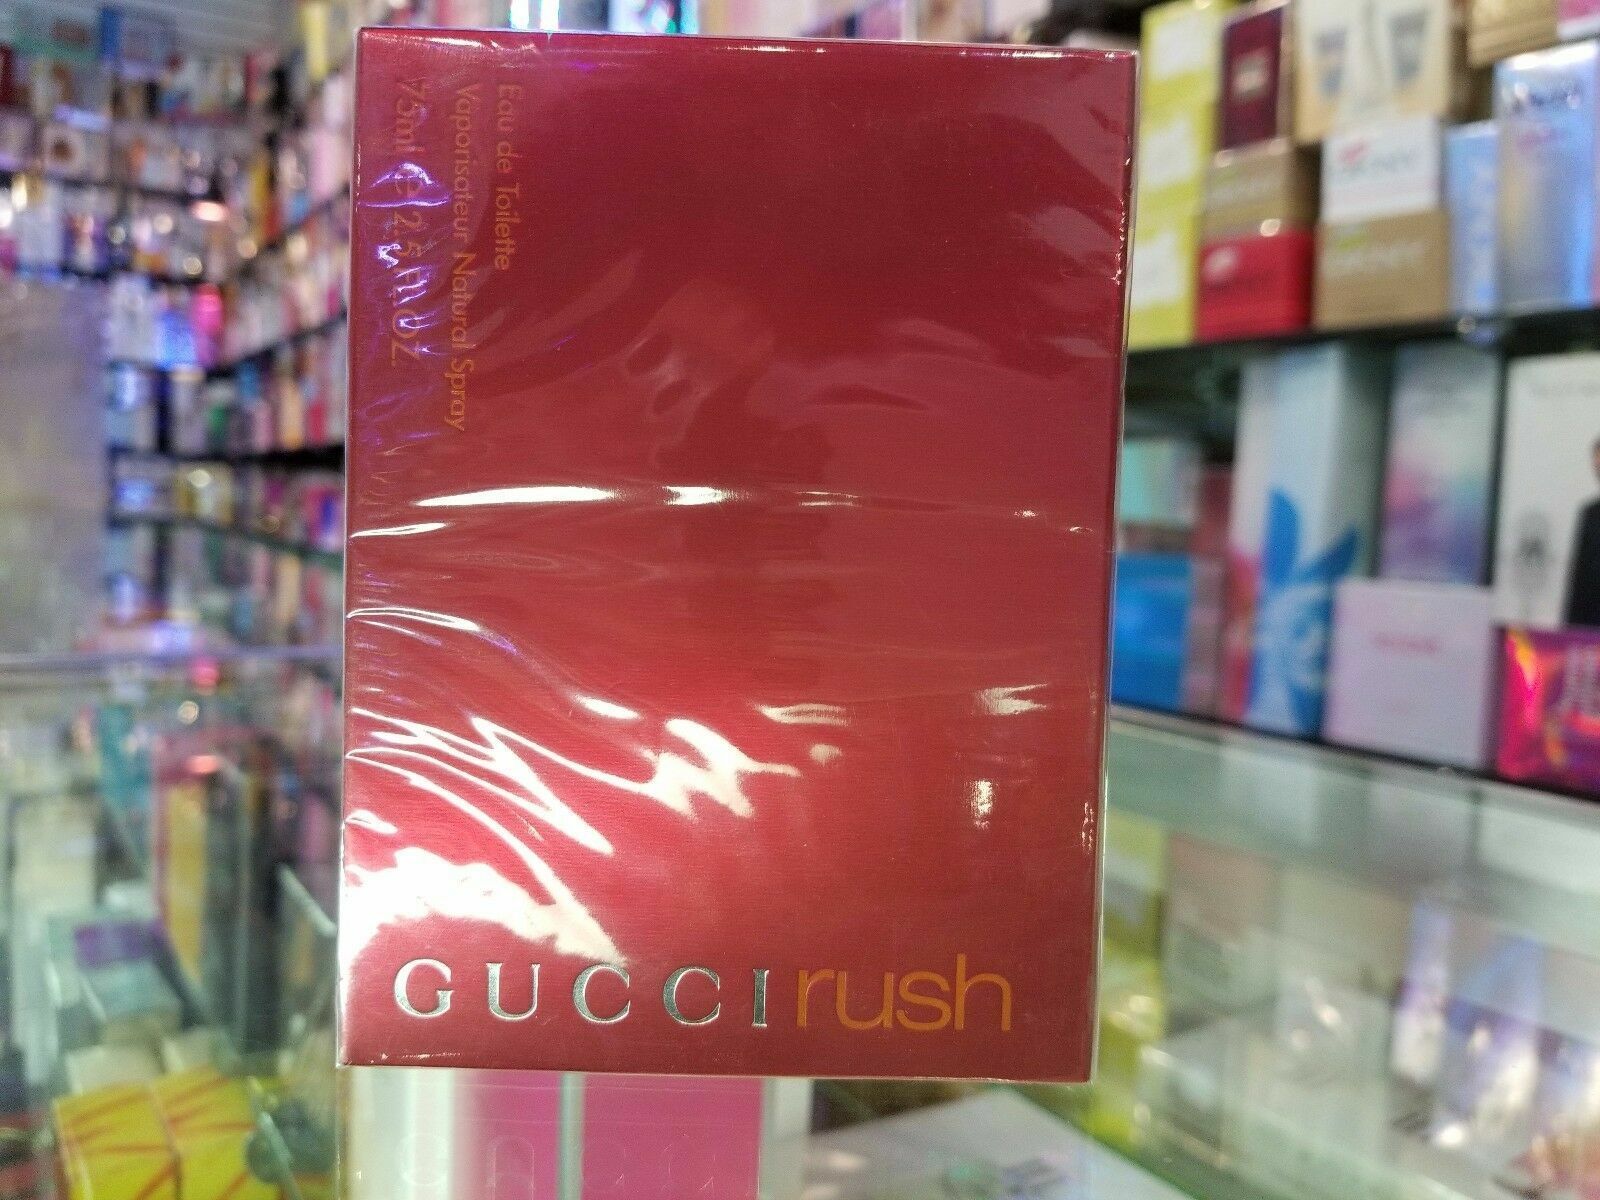 Gucci Rush Perfume for Women EDT 2.5 oz 75 ml Brand New Item ** IN SEALED BOX ** - $199.69